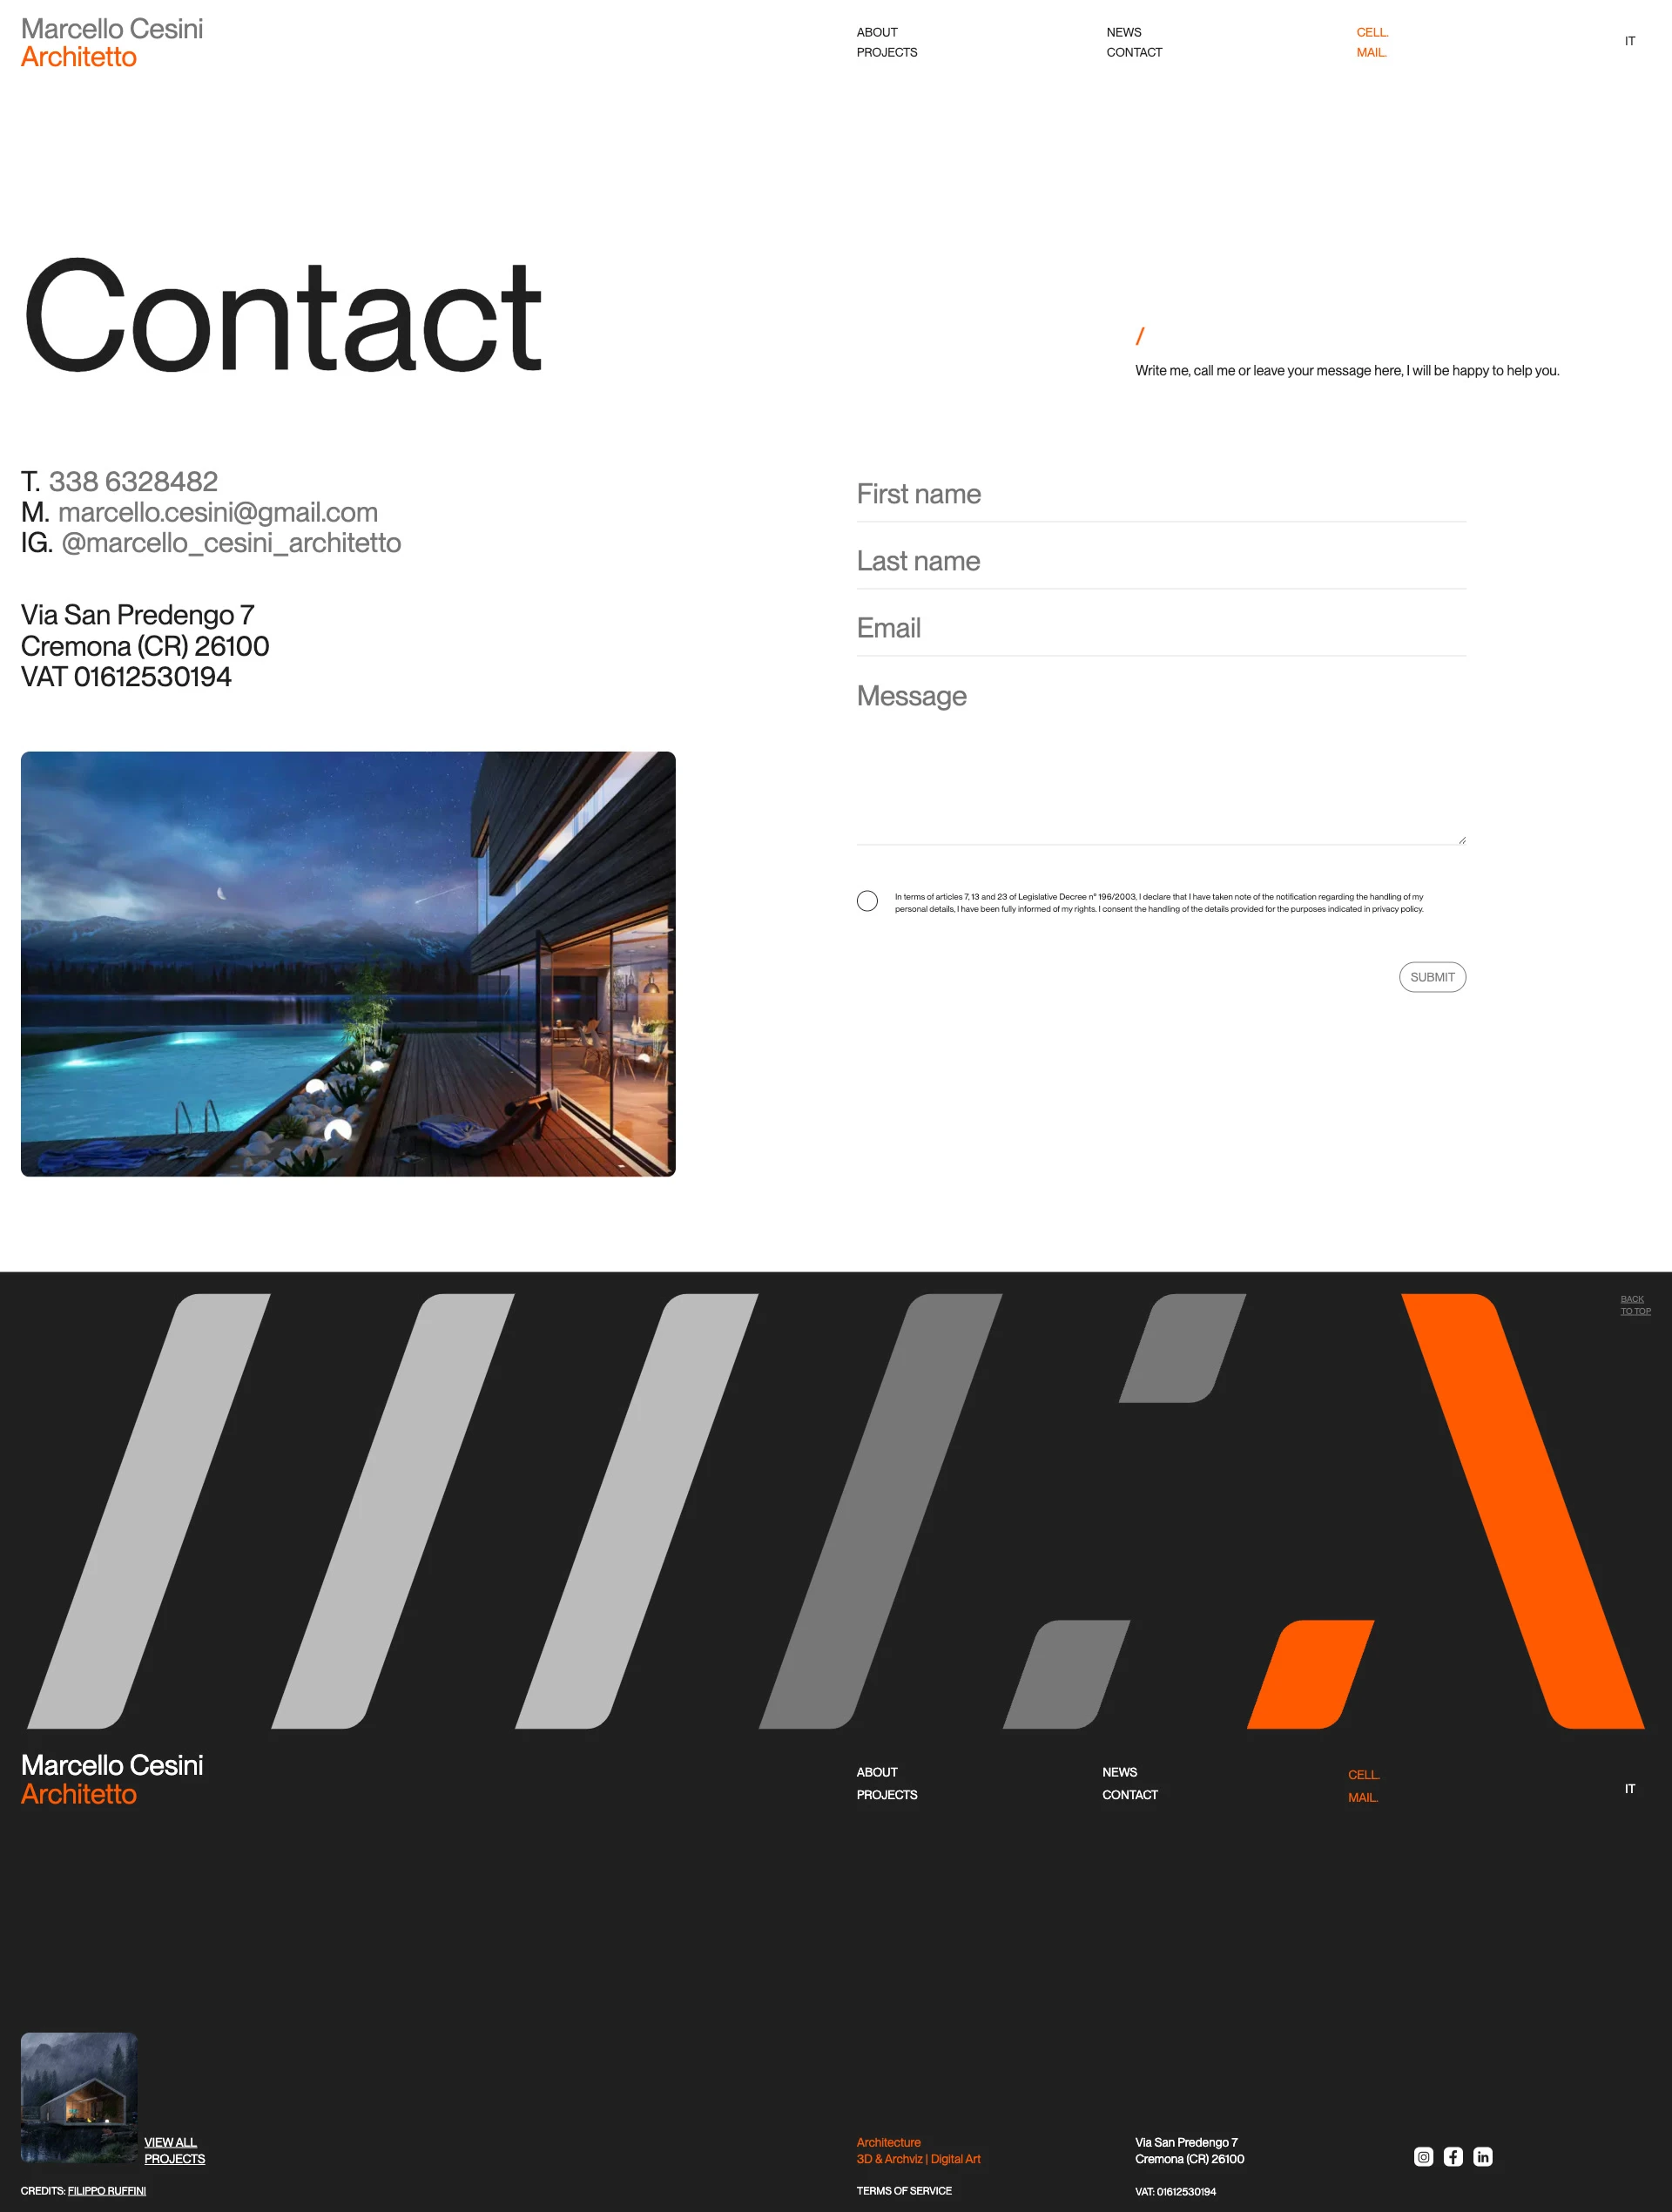 Marcello Cesini Landing Page Example: Architecture is a full part of life and the world. The architect's task is to put all of himself into his works to make them functional while respecting the environment, thus enabling humans to coexist in harmony with it.